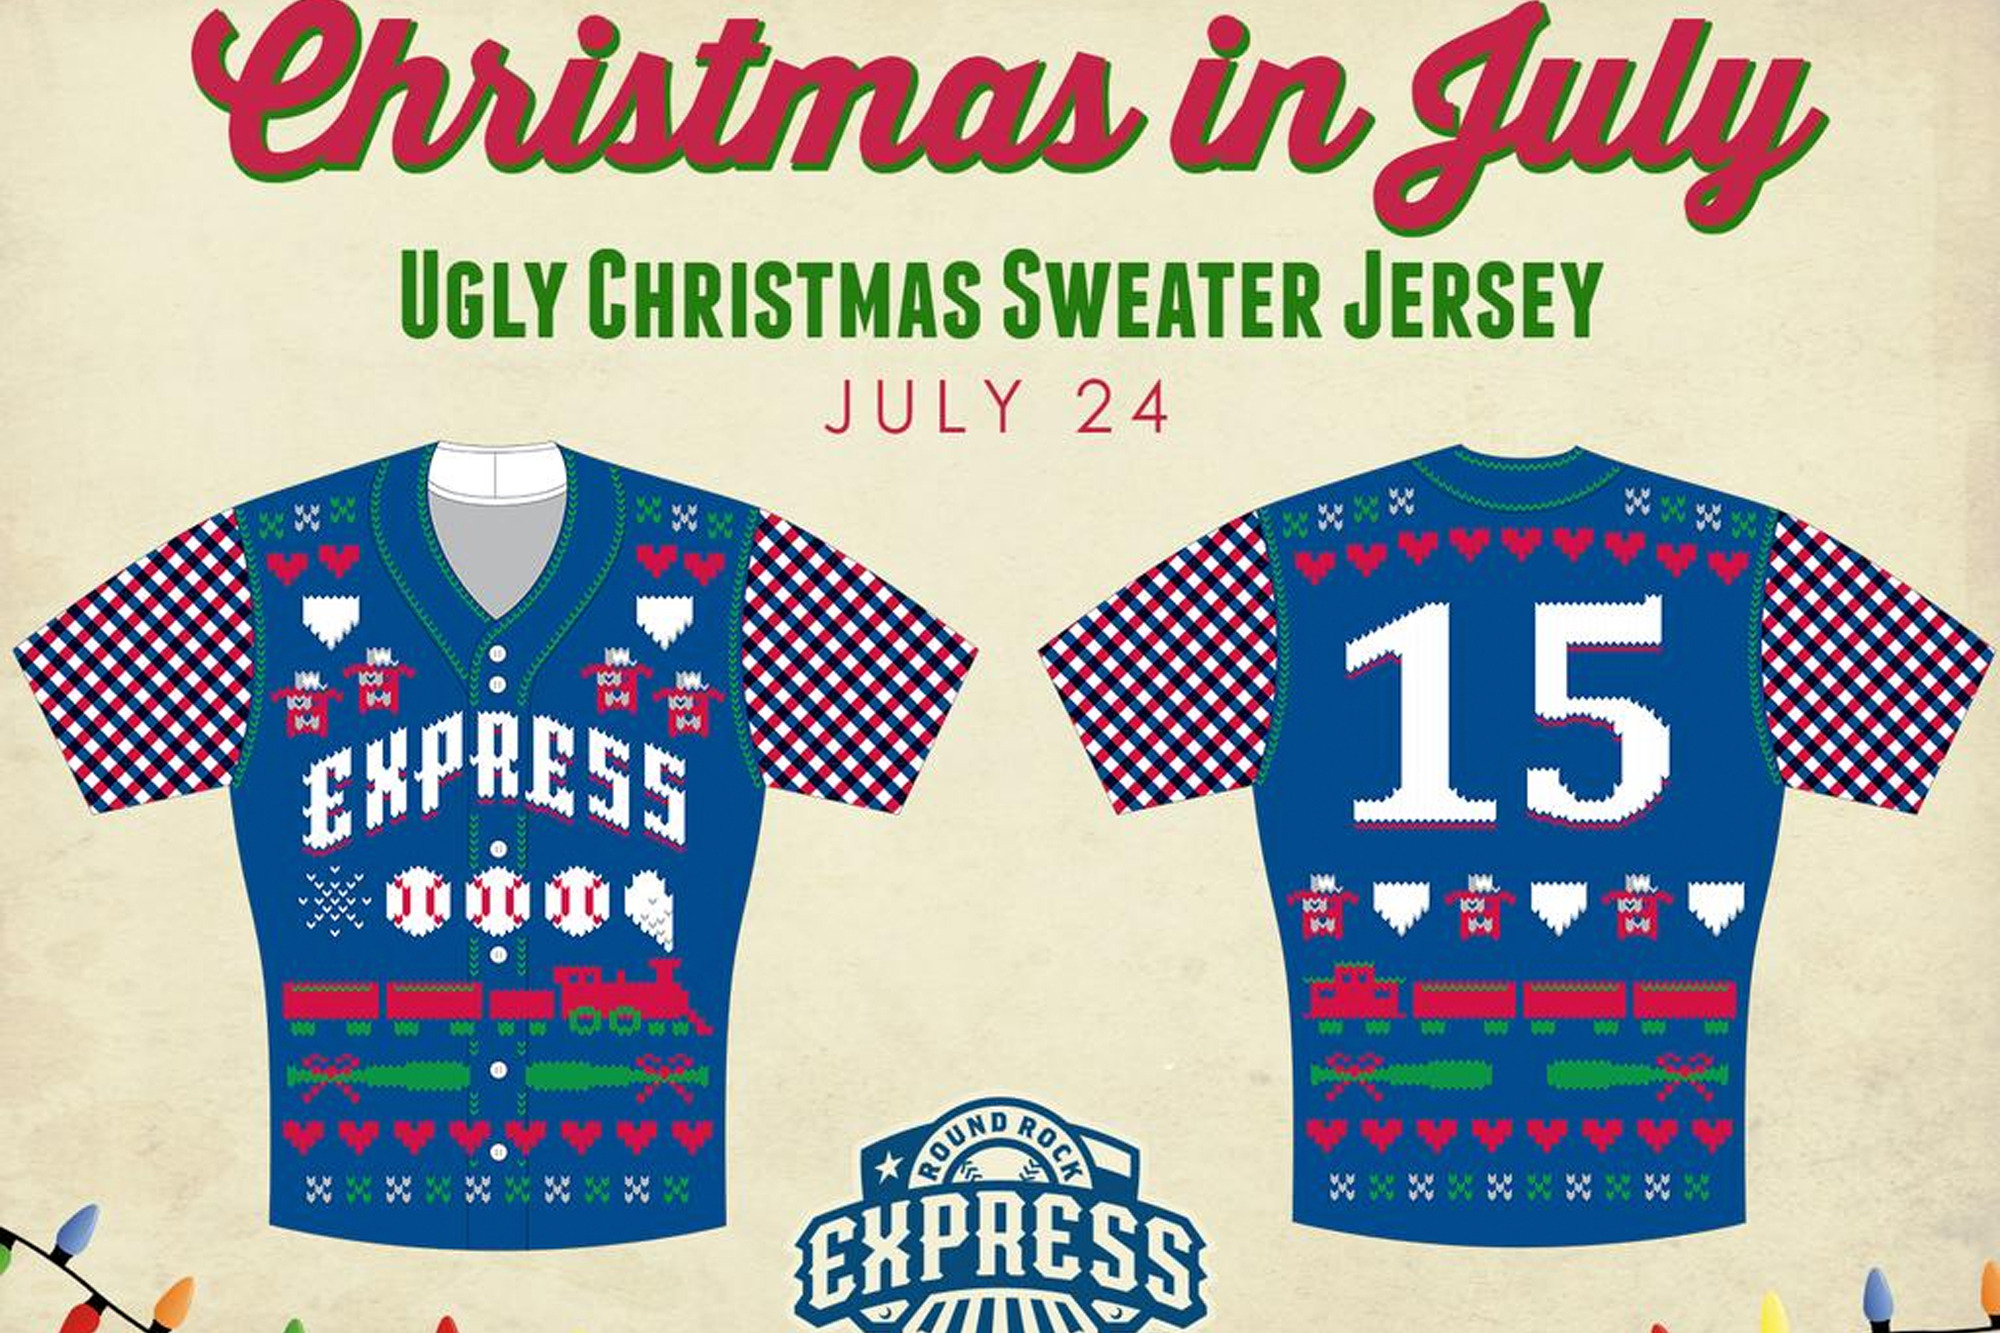 Ugly Sweater Round Rock Express